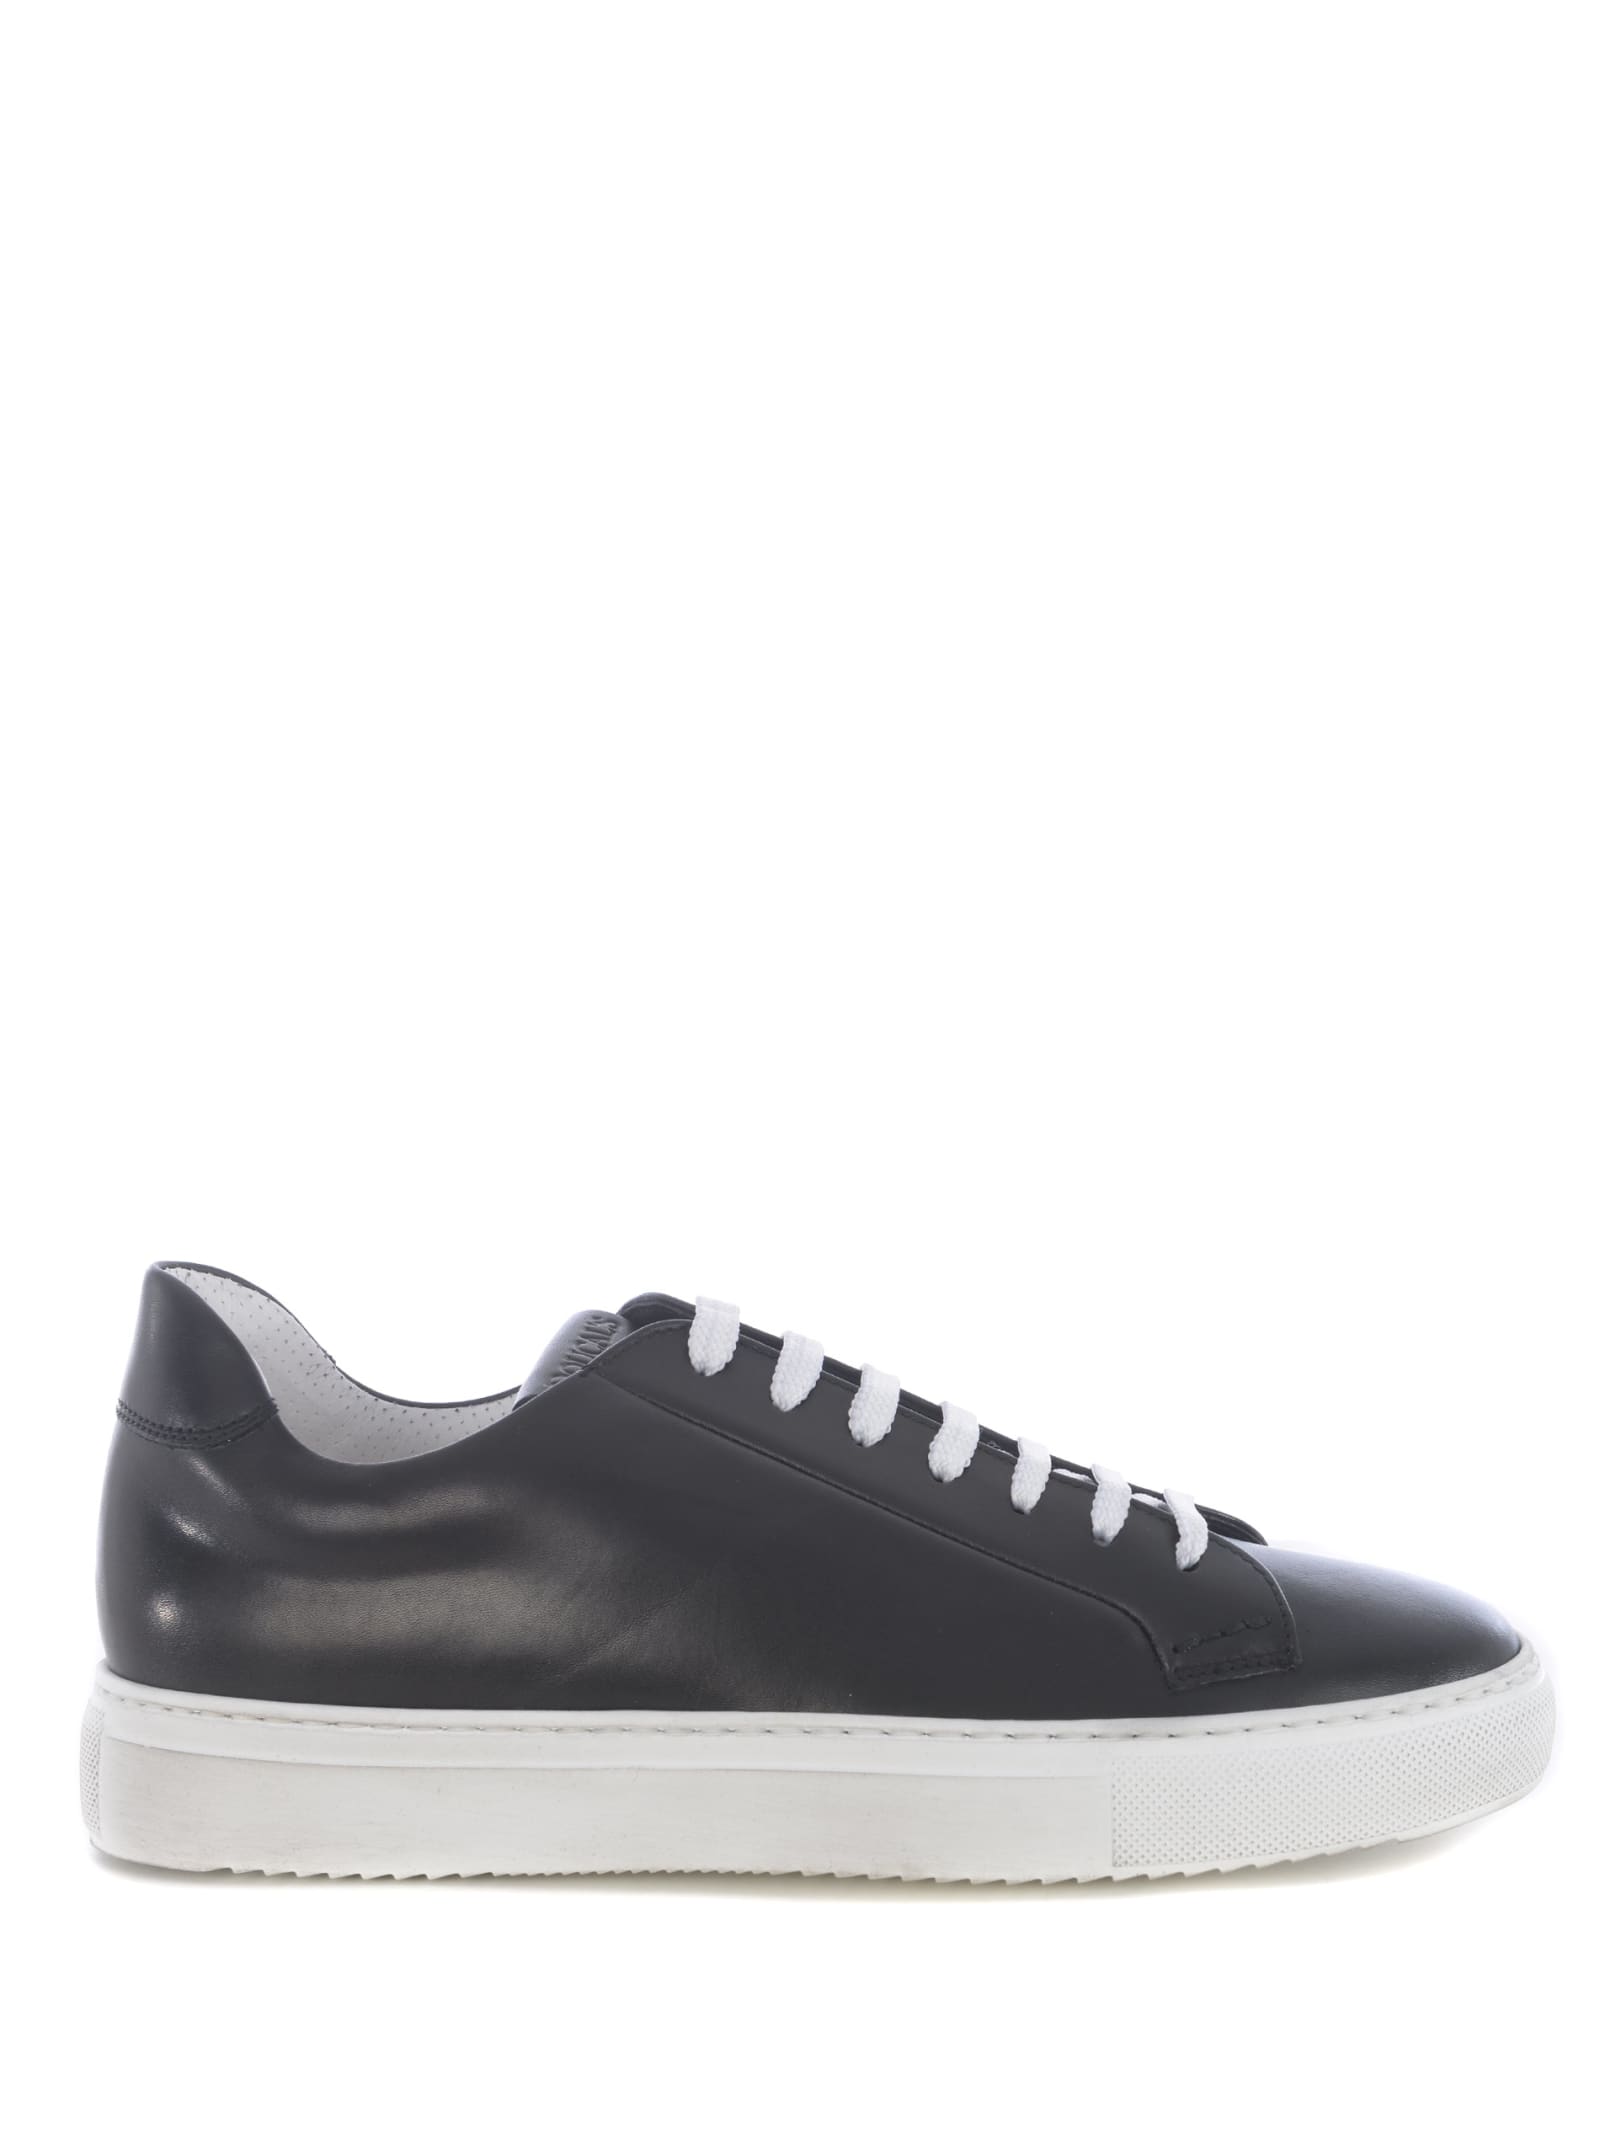 Doucal's Doucals radica Soft Mens Sneakers In Leather